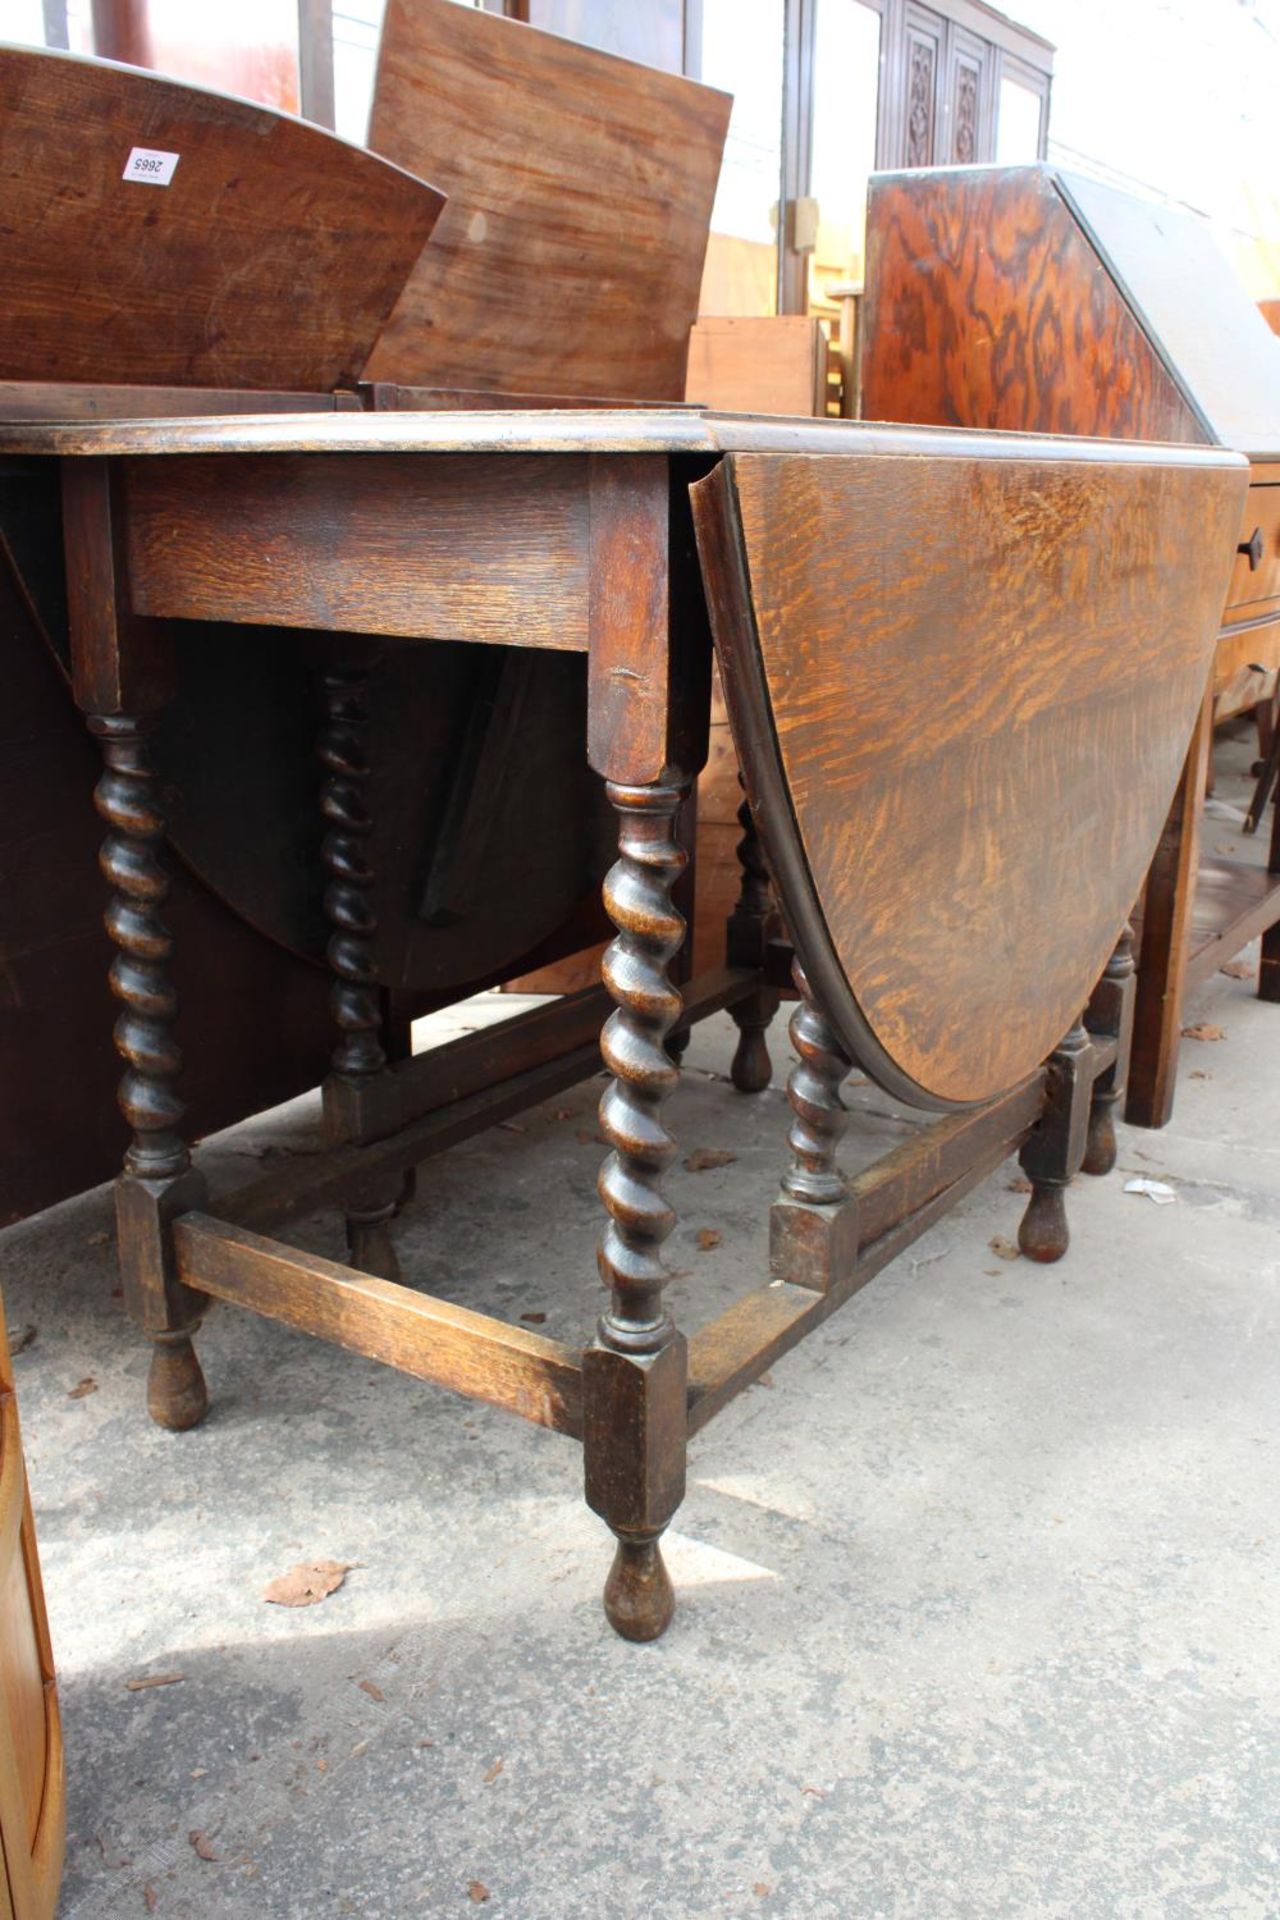 AN EARLY 20TH CENTURY OAK GATE-LEG DINING TABLE ON BARLEY-TWIST LEGS, 57" X 42" OPENED - Image 2 of 3